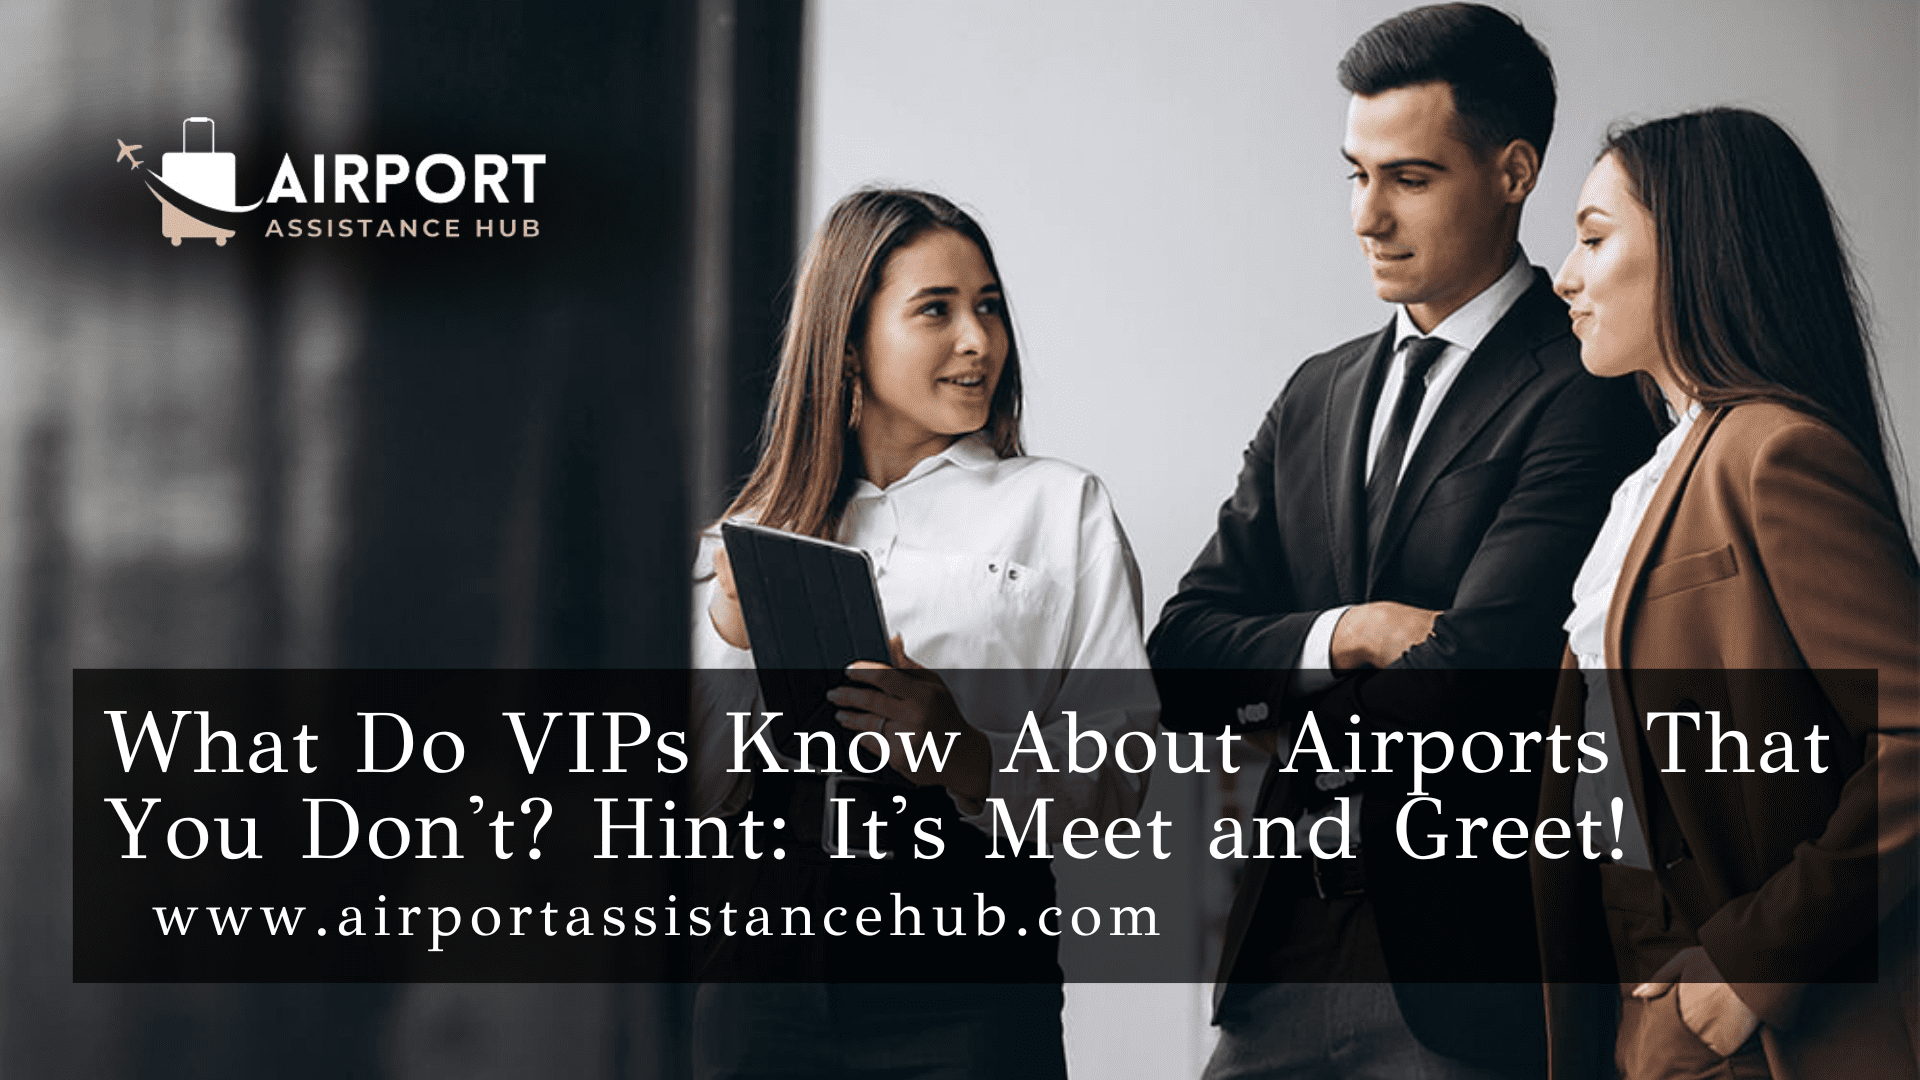 What Do VIPs Know About Airports That You Don’t? Hint: It’s Meet and Greet!